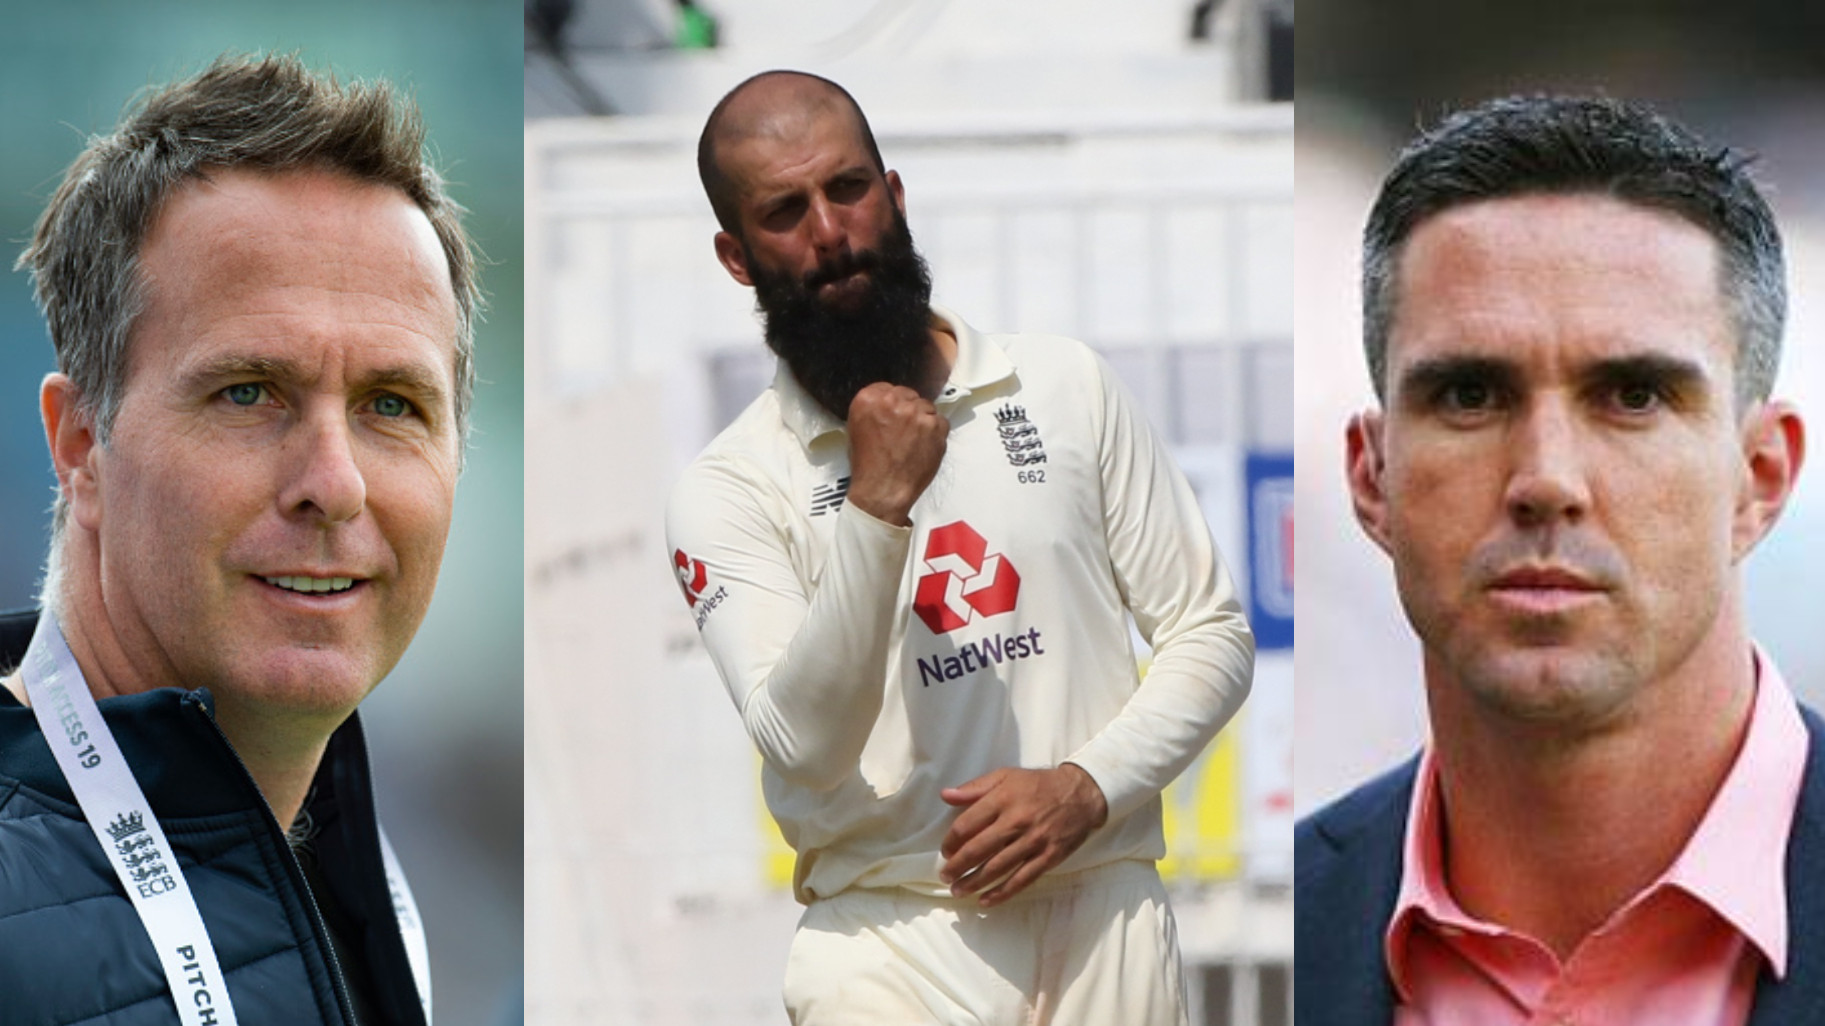 IND v ENG 2021: Michael Vaughan and Kevin Pietersen shocked to see Moeen Ali returning home